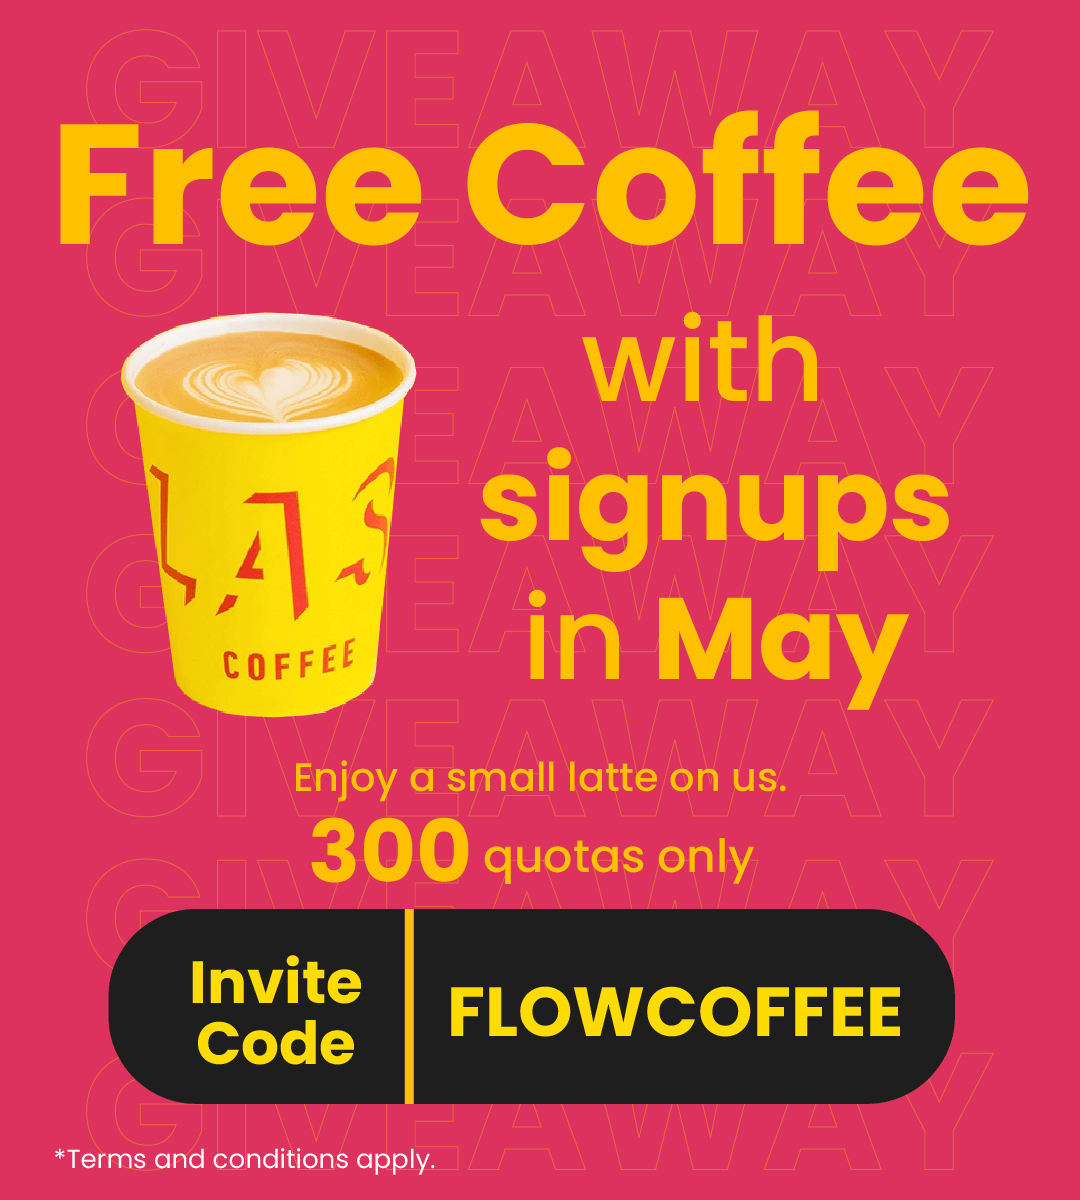 New Member Exclusive: Free Latte at Flash Coffee